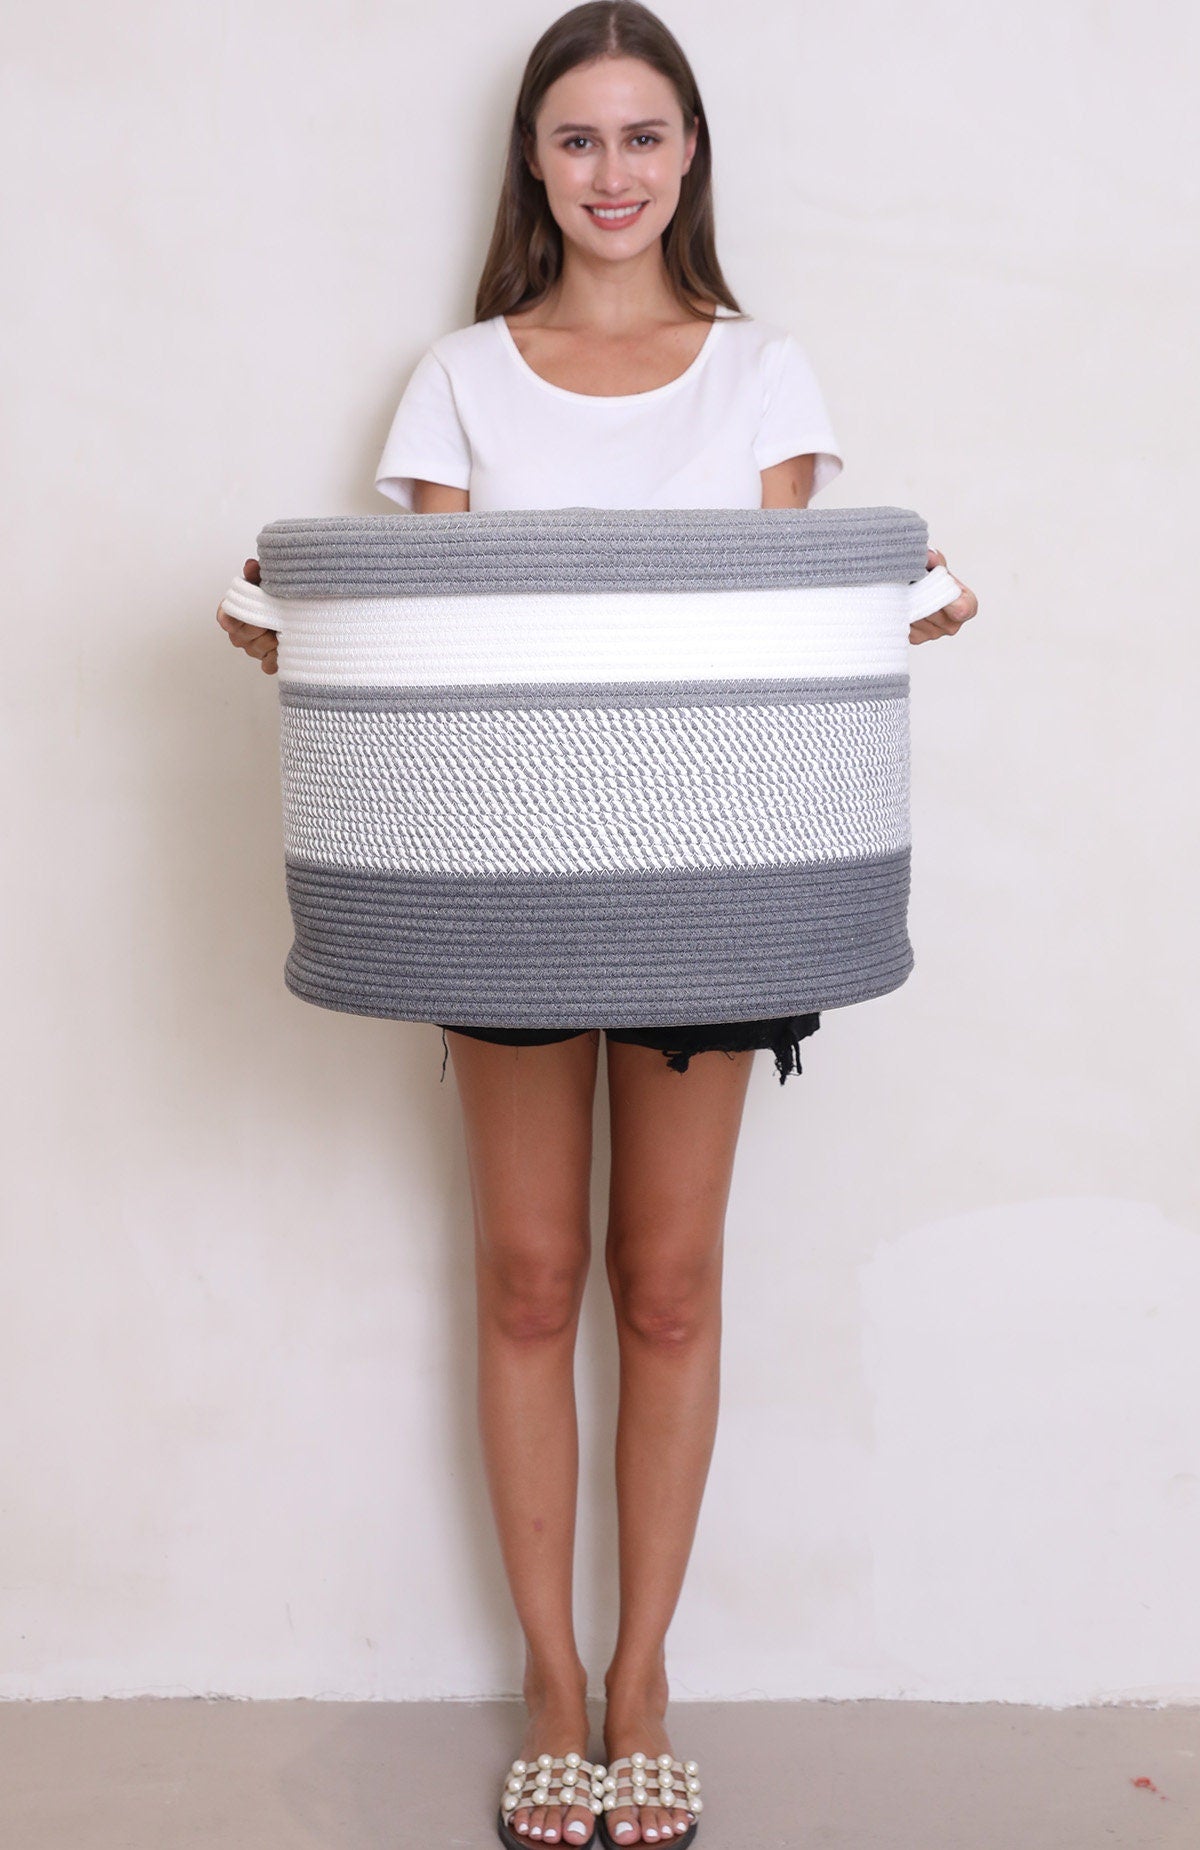 20" x 20" x 15" Extra Large Storage Basket with Lid, Cotton Rope Storage Baskets, Laundry Hamper, Toy Bin, Grey Mix/Dark Grey with Cover